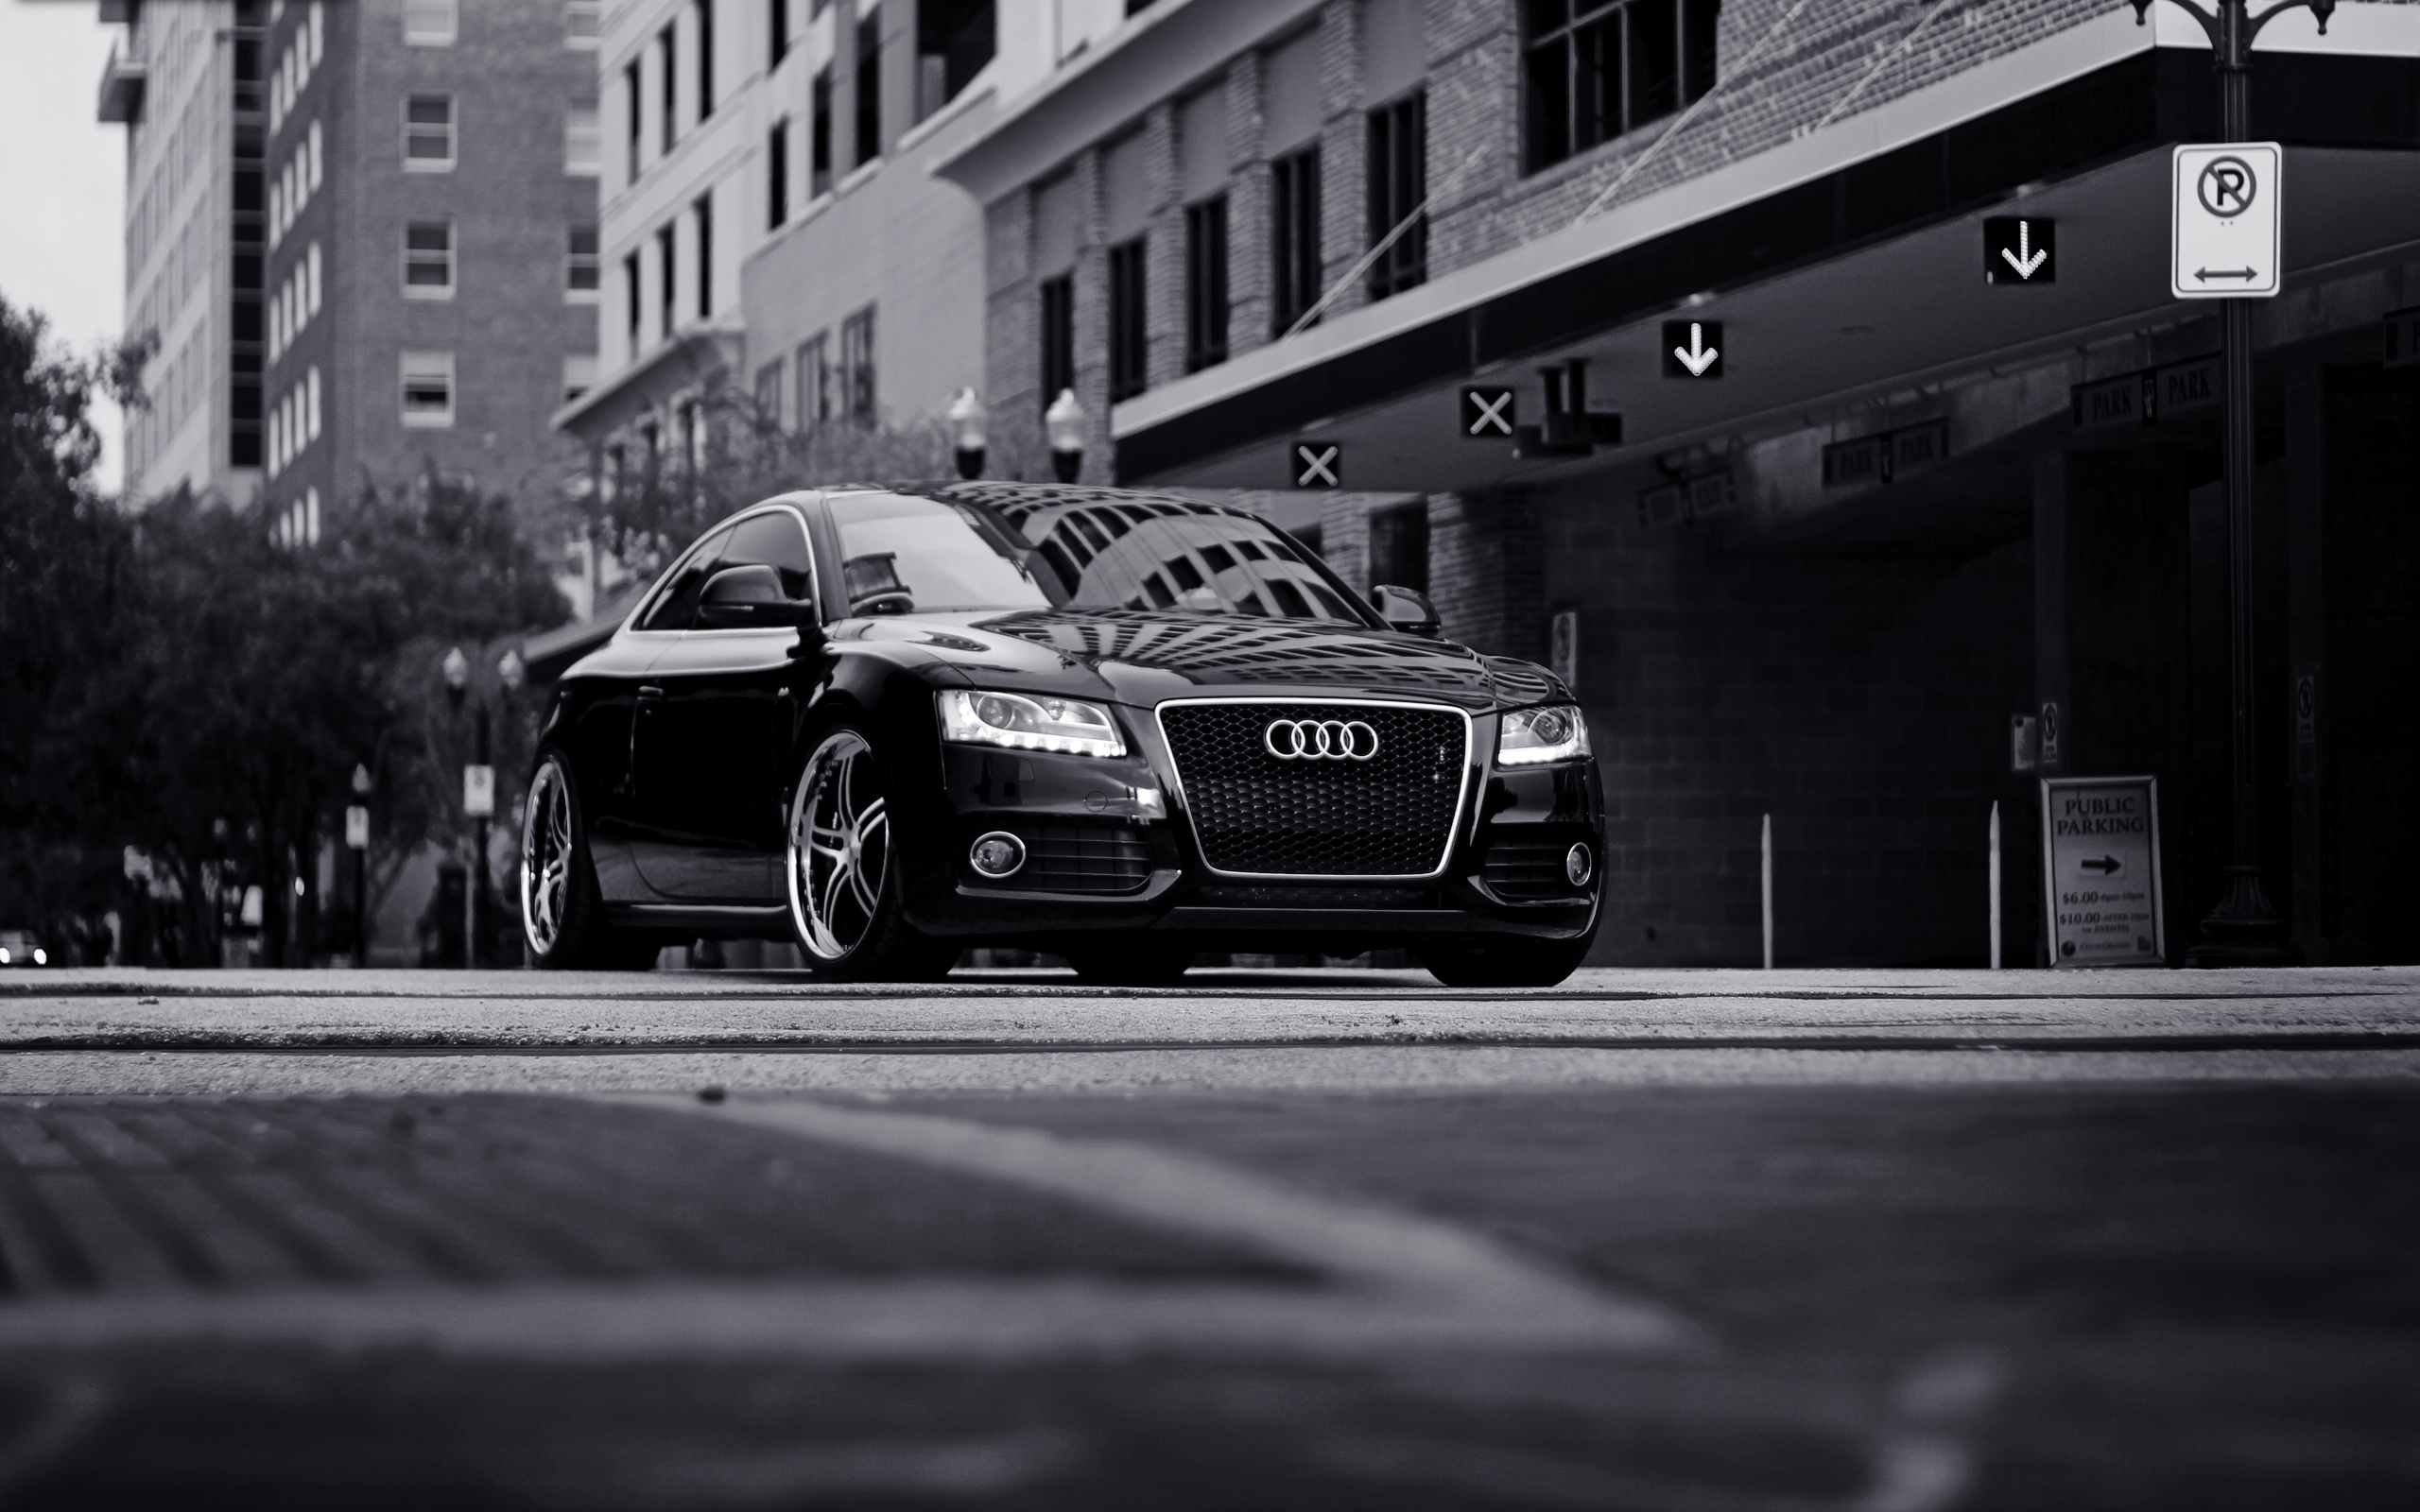 Audi Hd Wallpapers For Pc - HD Wallpaper 